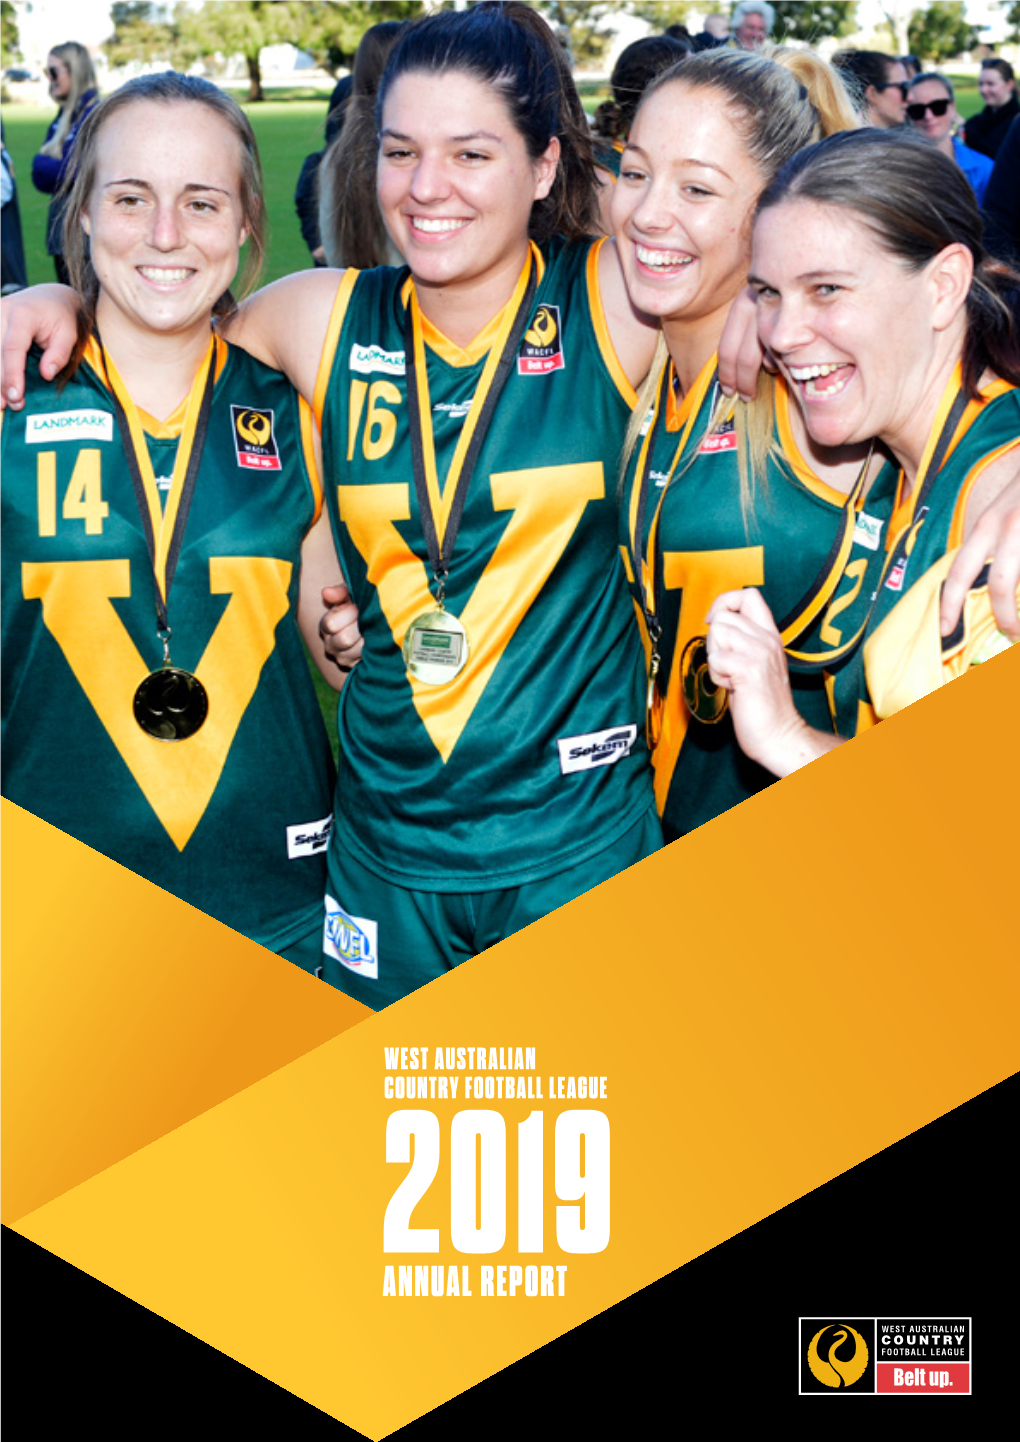 WEST AUSTRALIAN COUNTRY FOOTBALL LEAGUE 2019 ANNUAL REPORT Last Year, 71 People Who Weren’T Wearing a Seat Belt Were Killed Or Seriously Injured in a Crash